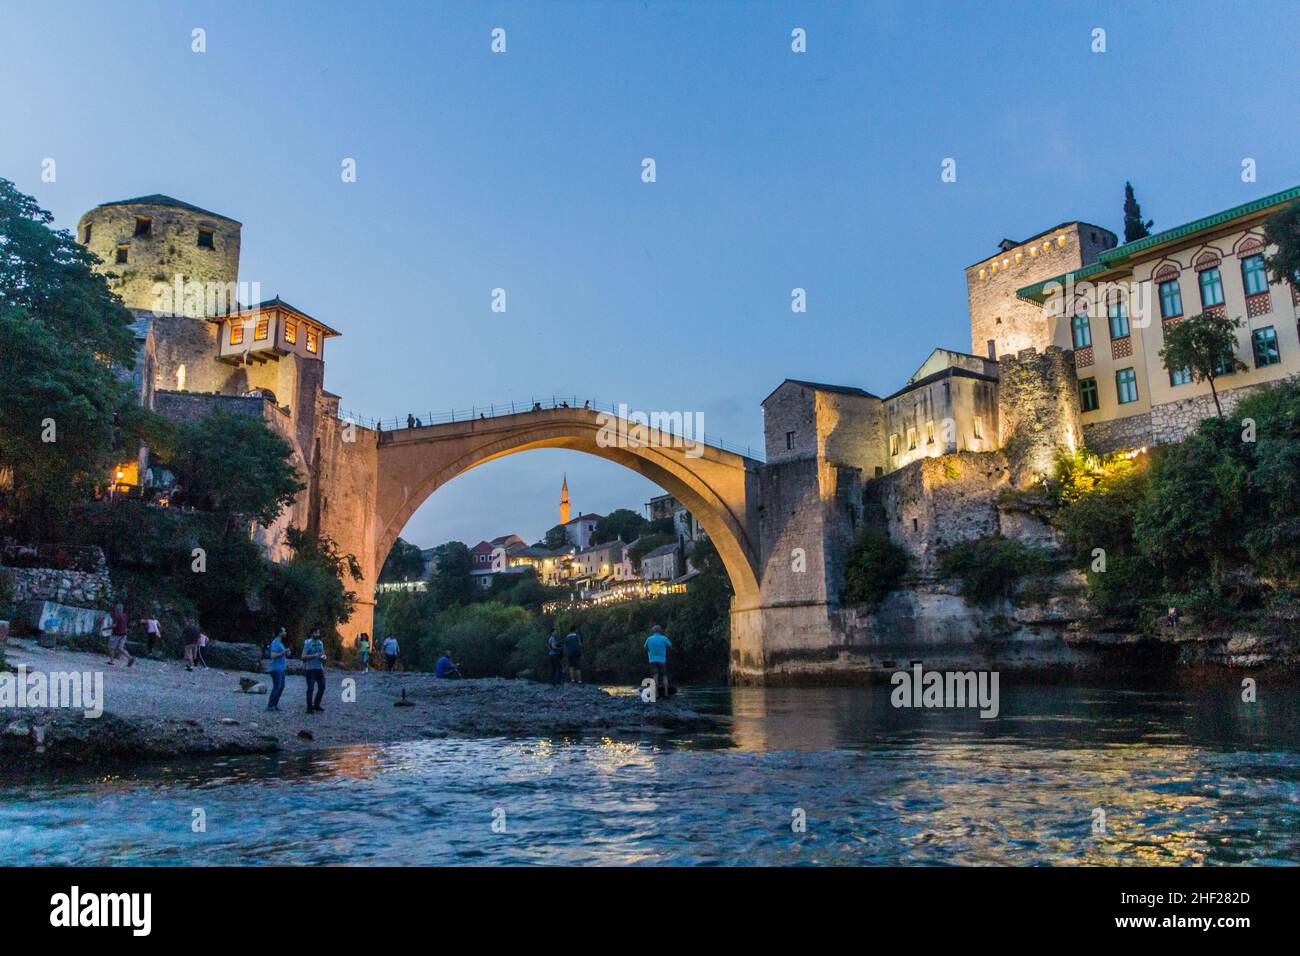 MOSTAR, BOSNIA AND HERZEGOVINA - JUNE 10, 2019: Evening view of Stari most (Old Bridge) and old stone buildings in Mostar. Bosnia and Herzegovina Stock Photo